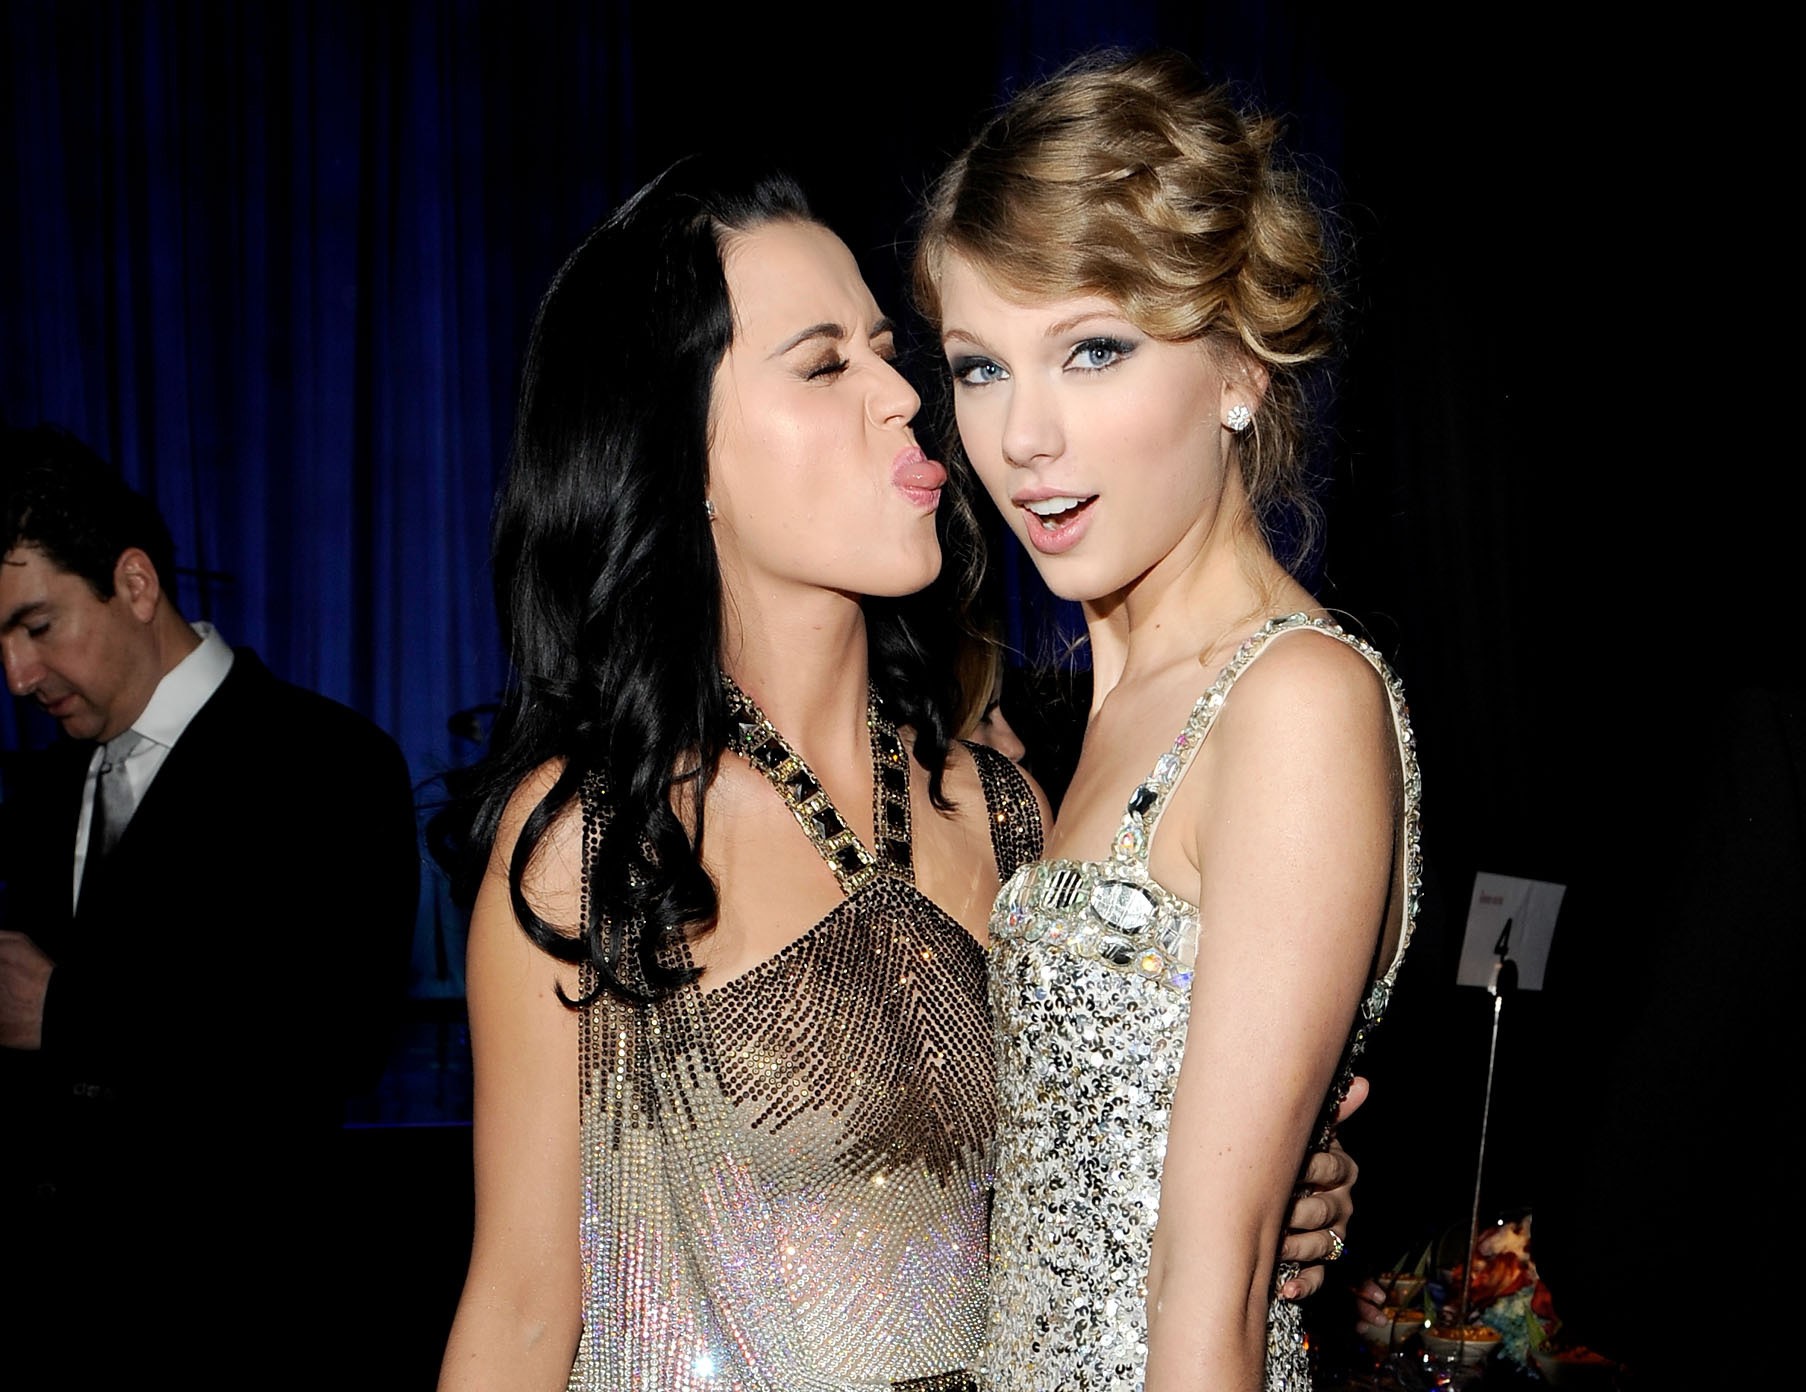 Katy Perry e Taylor Swift em 2010 (Foto: Getty Images)